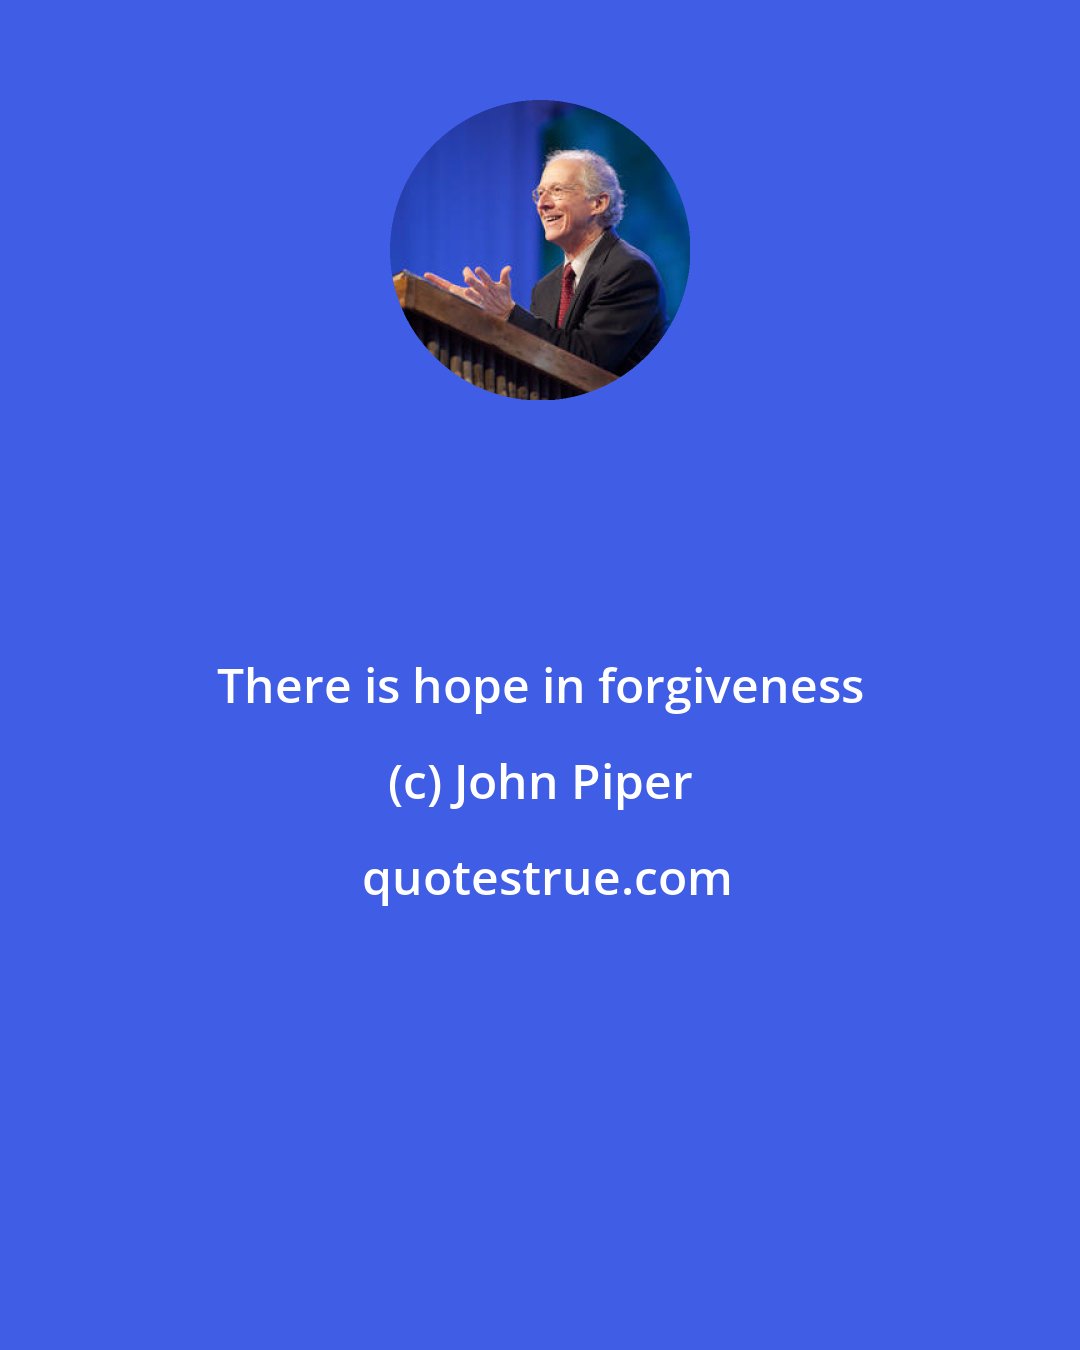 John Piper: There is hope in forgiveness